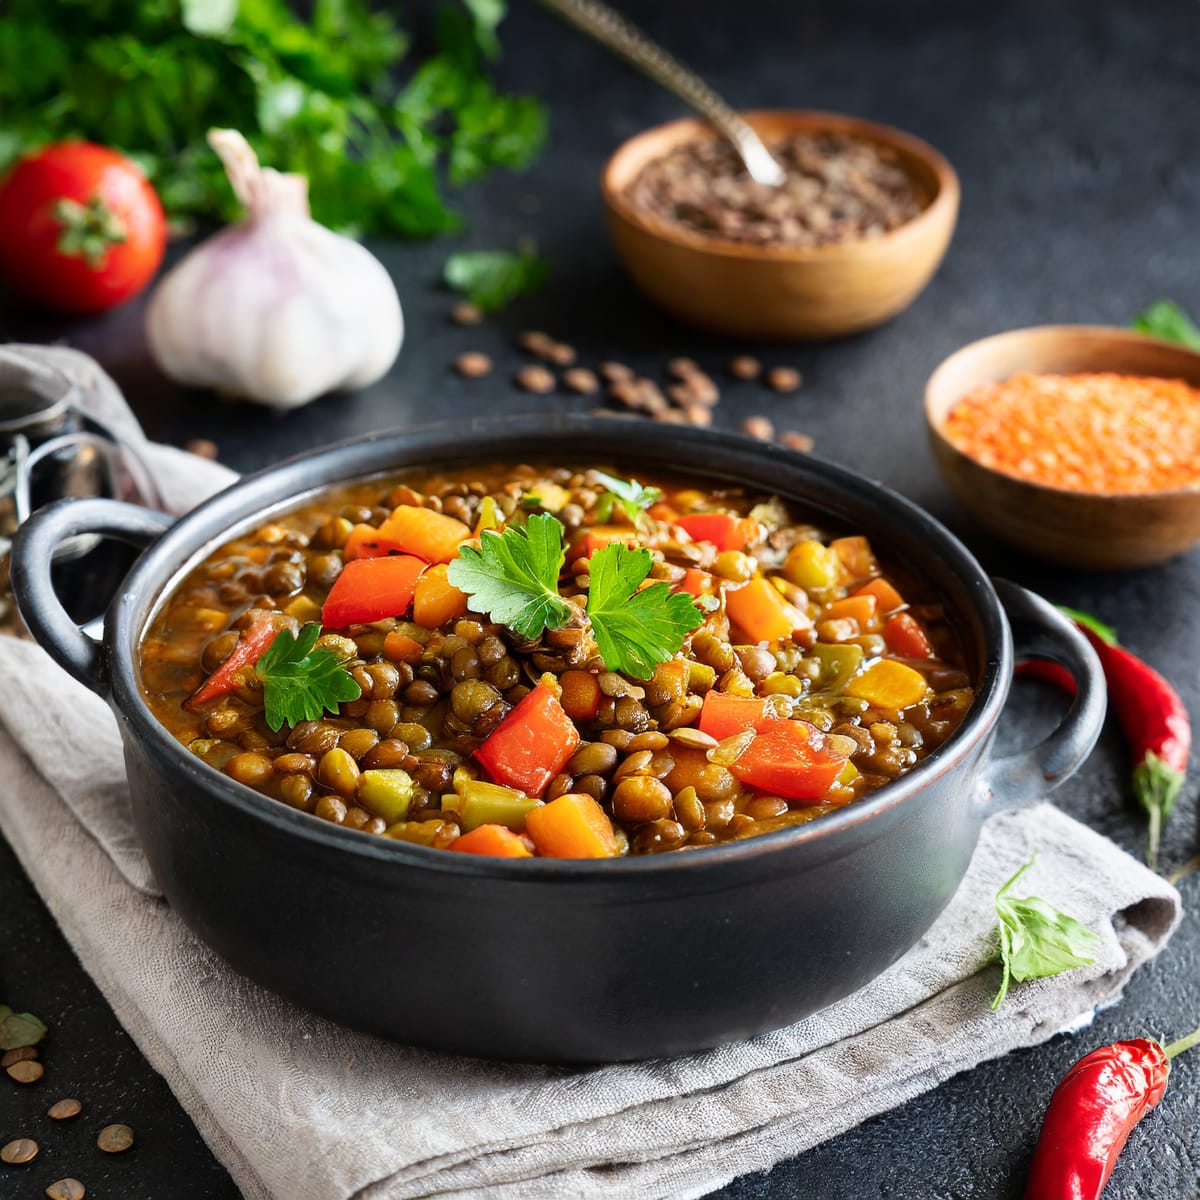 RECIPE: Spicy Lentil and Vegetable Stew